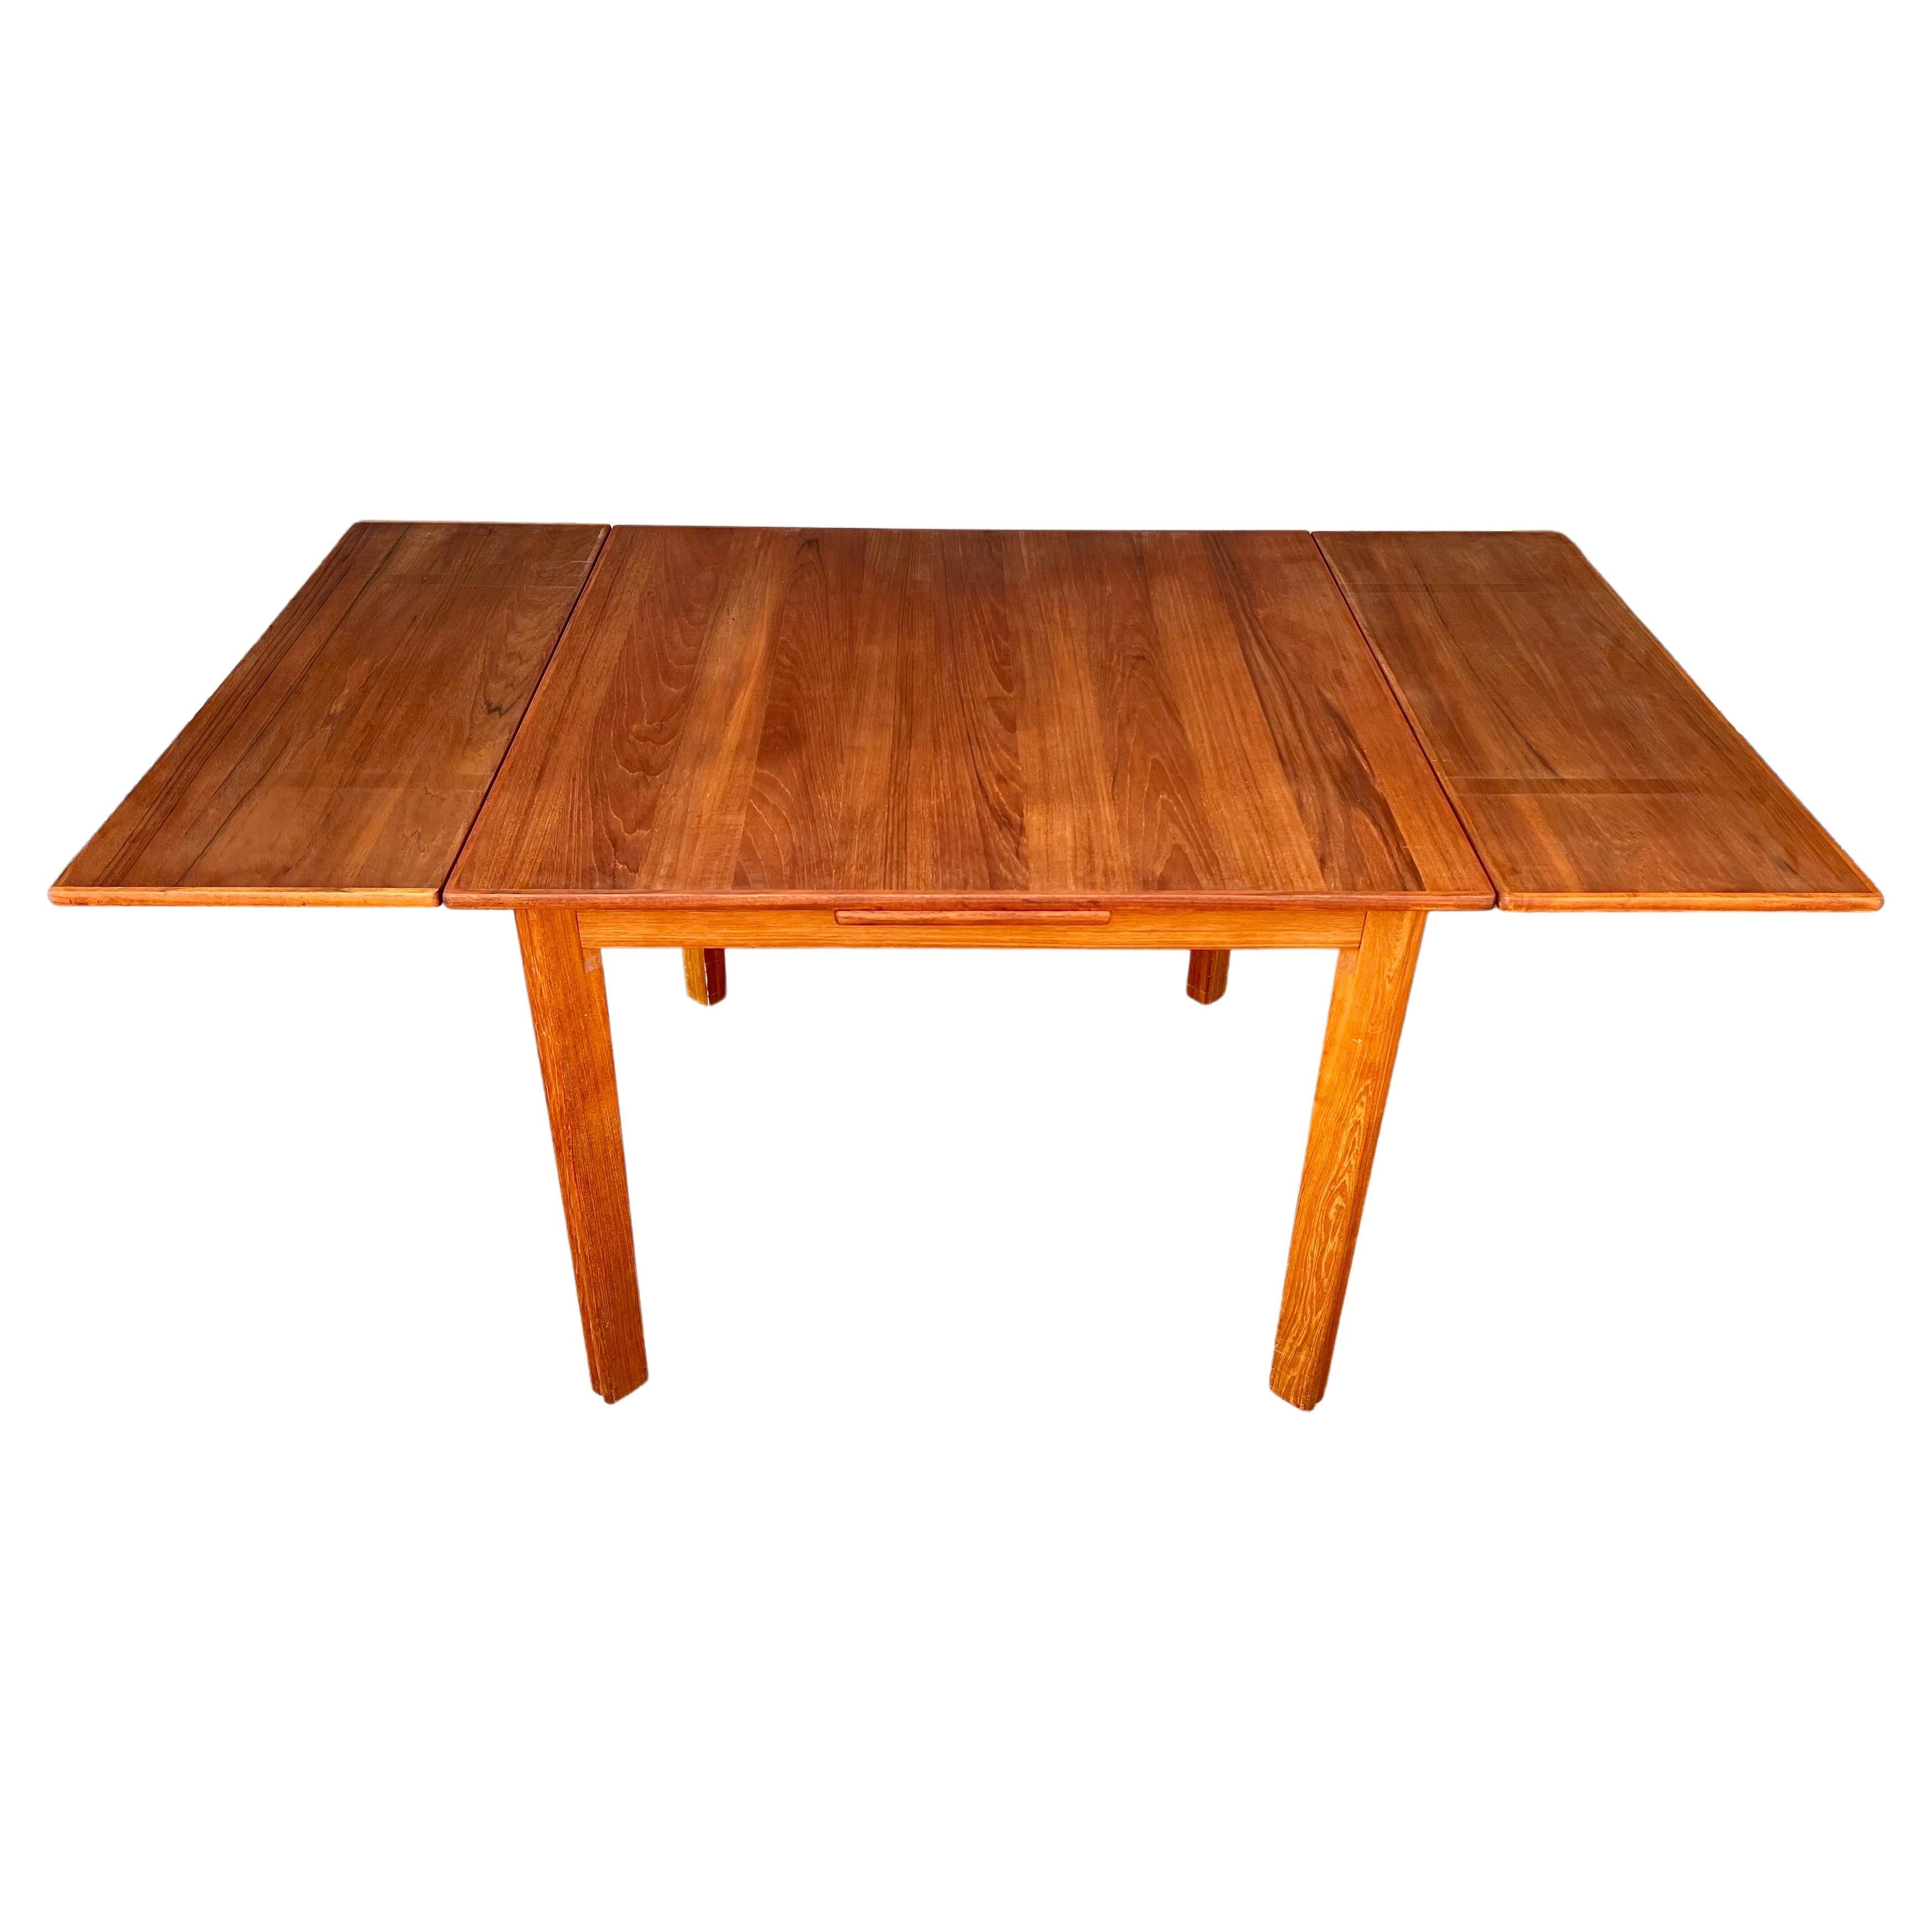 Versatile square Danish modern teak dining table, with 2 leaves that hide under the top, as shown nice solid teak legs freshly refinished, nice solid and sturdy the legs come off for easy shipping. The table its 38